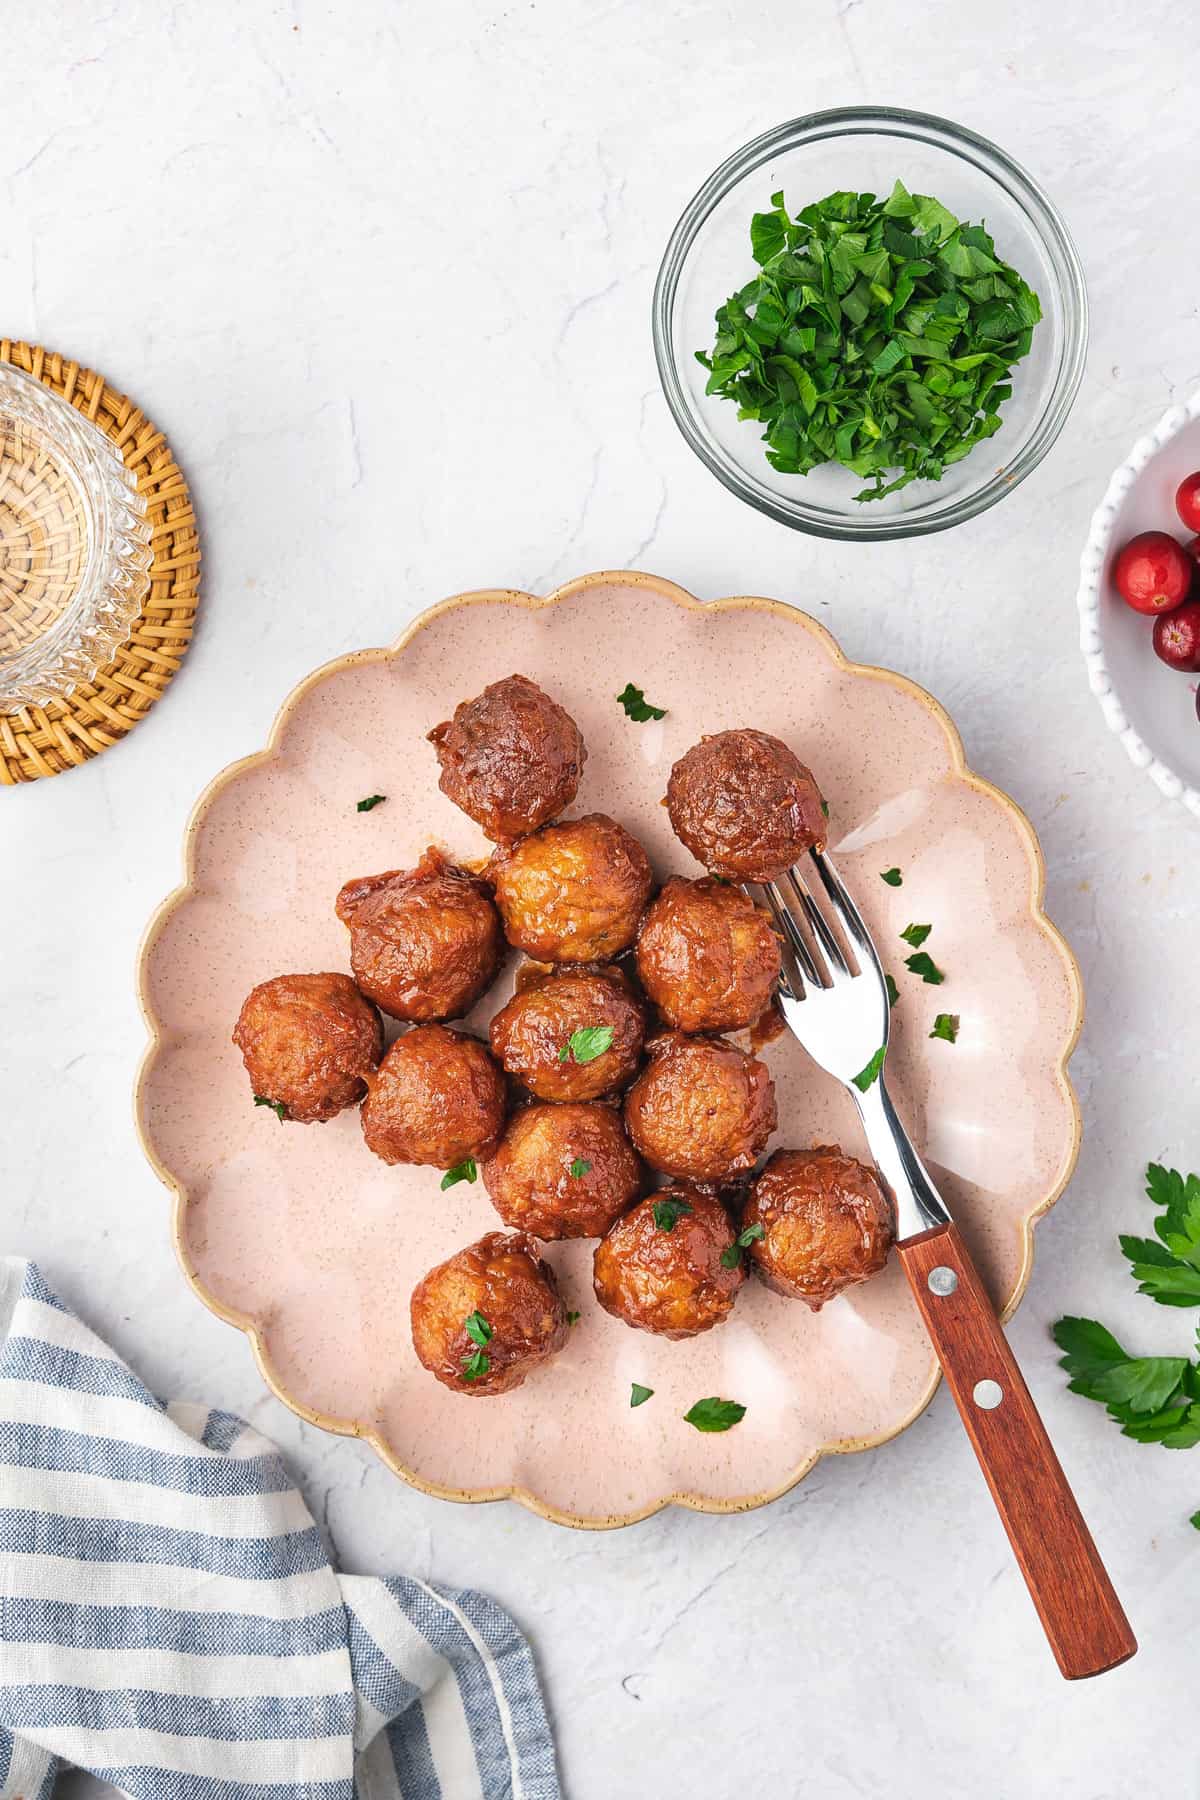 Overhead view of a scalloped plate with slow cooker cranberry meatballs and a fork.